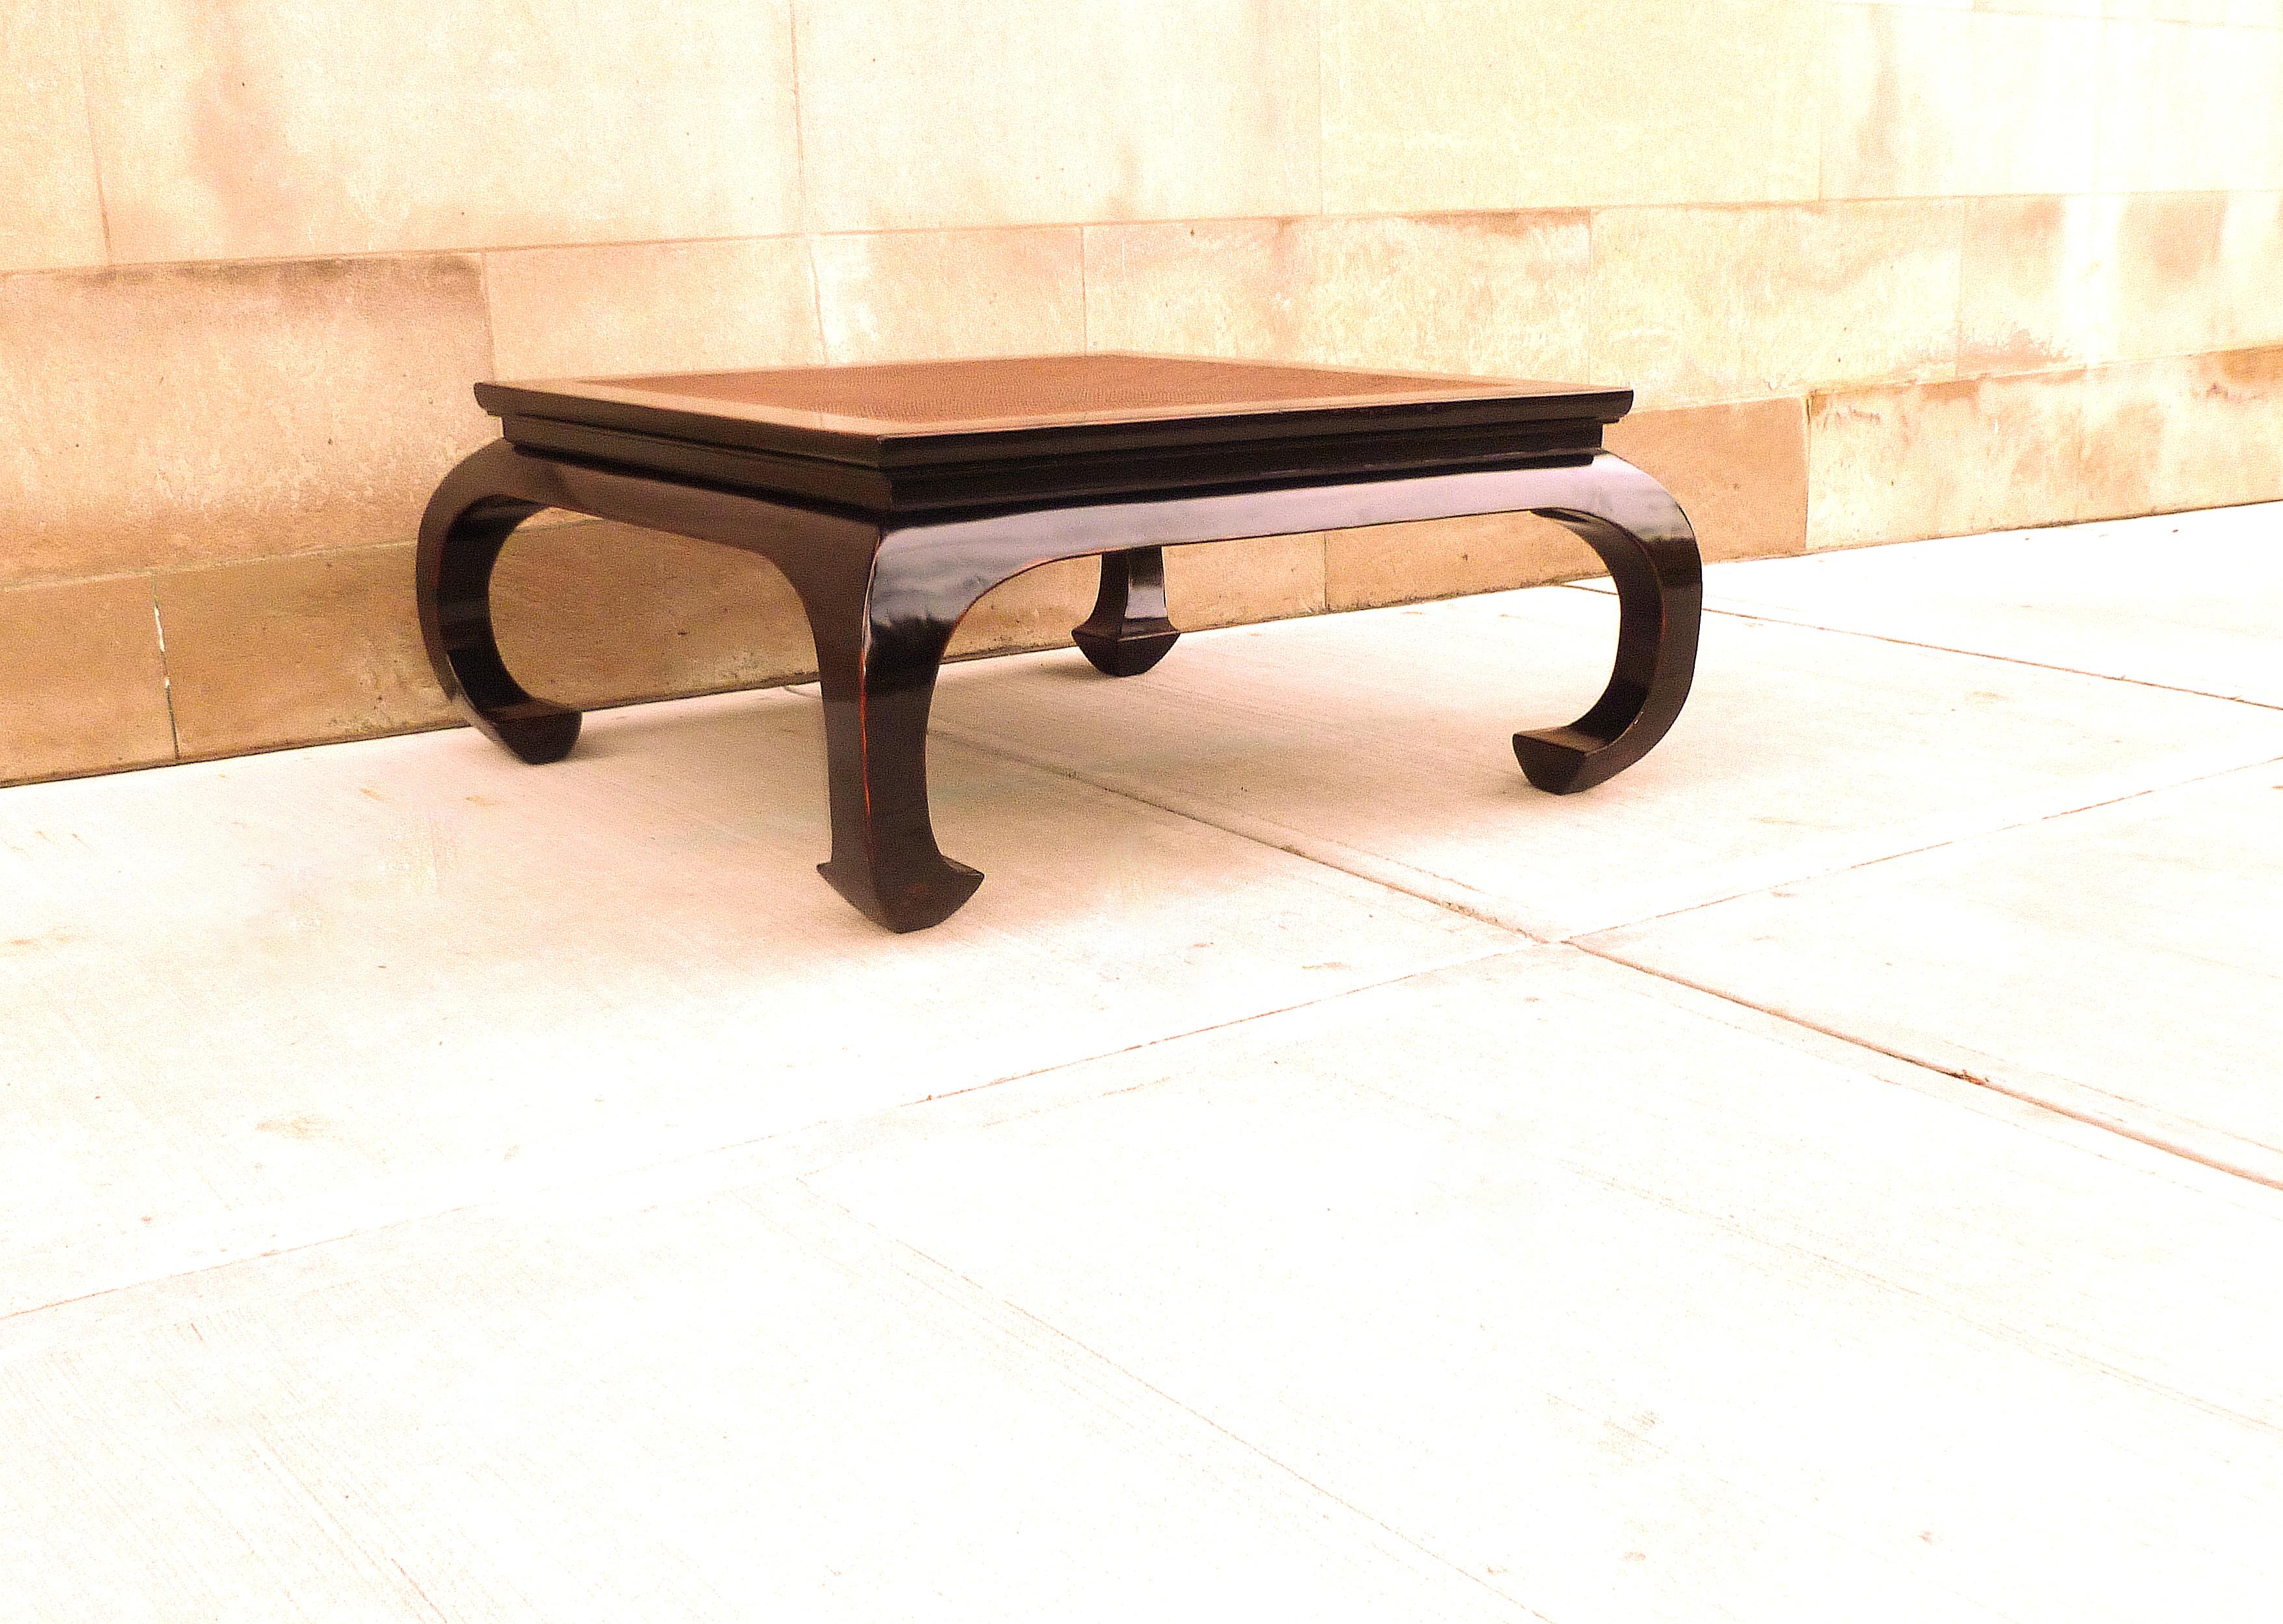 Ming Fine Black Lacquer Low Table / Coffee Table with Hard Wood Canned Top